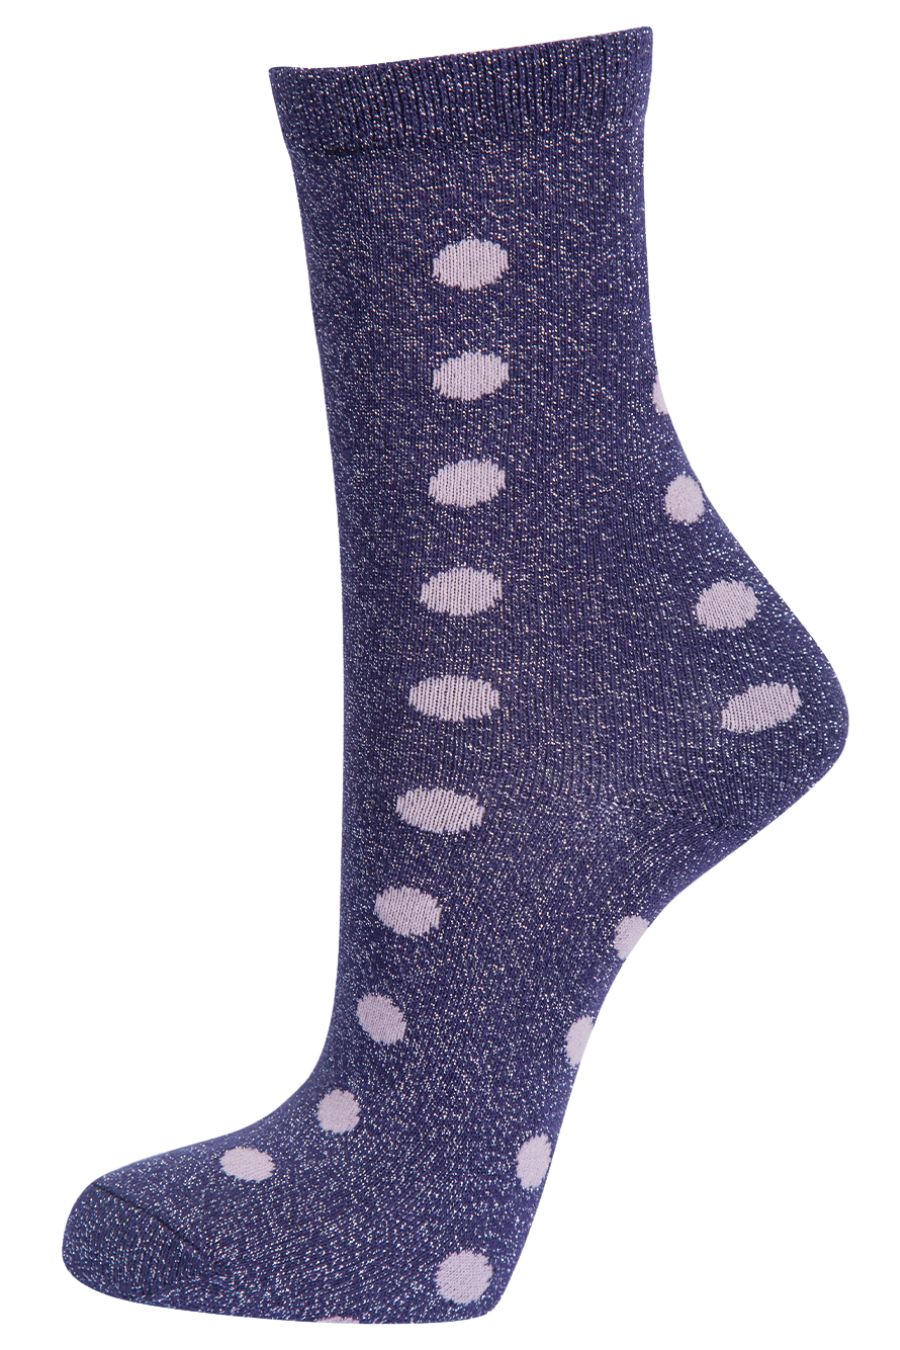 navy blue and pink polka dot ankle socks with an all over silver glitter effect